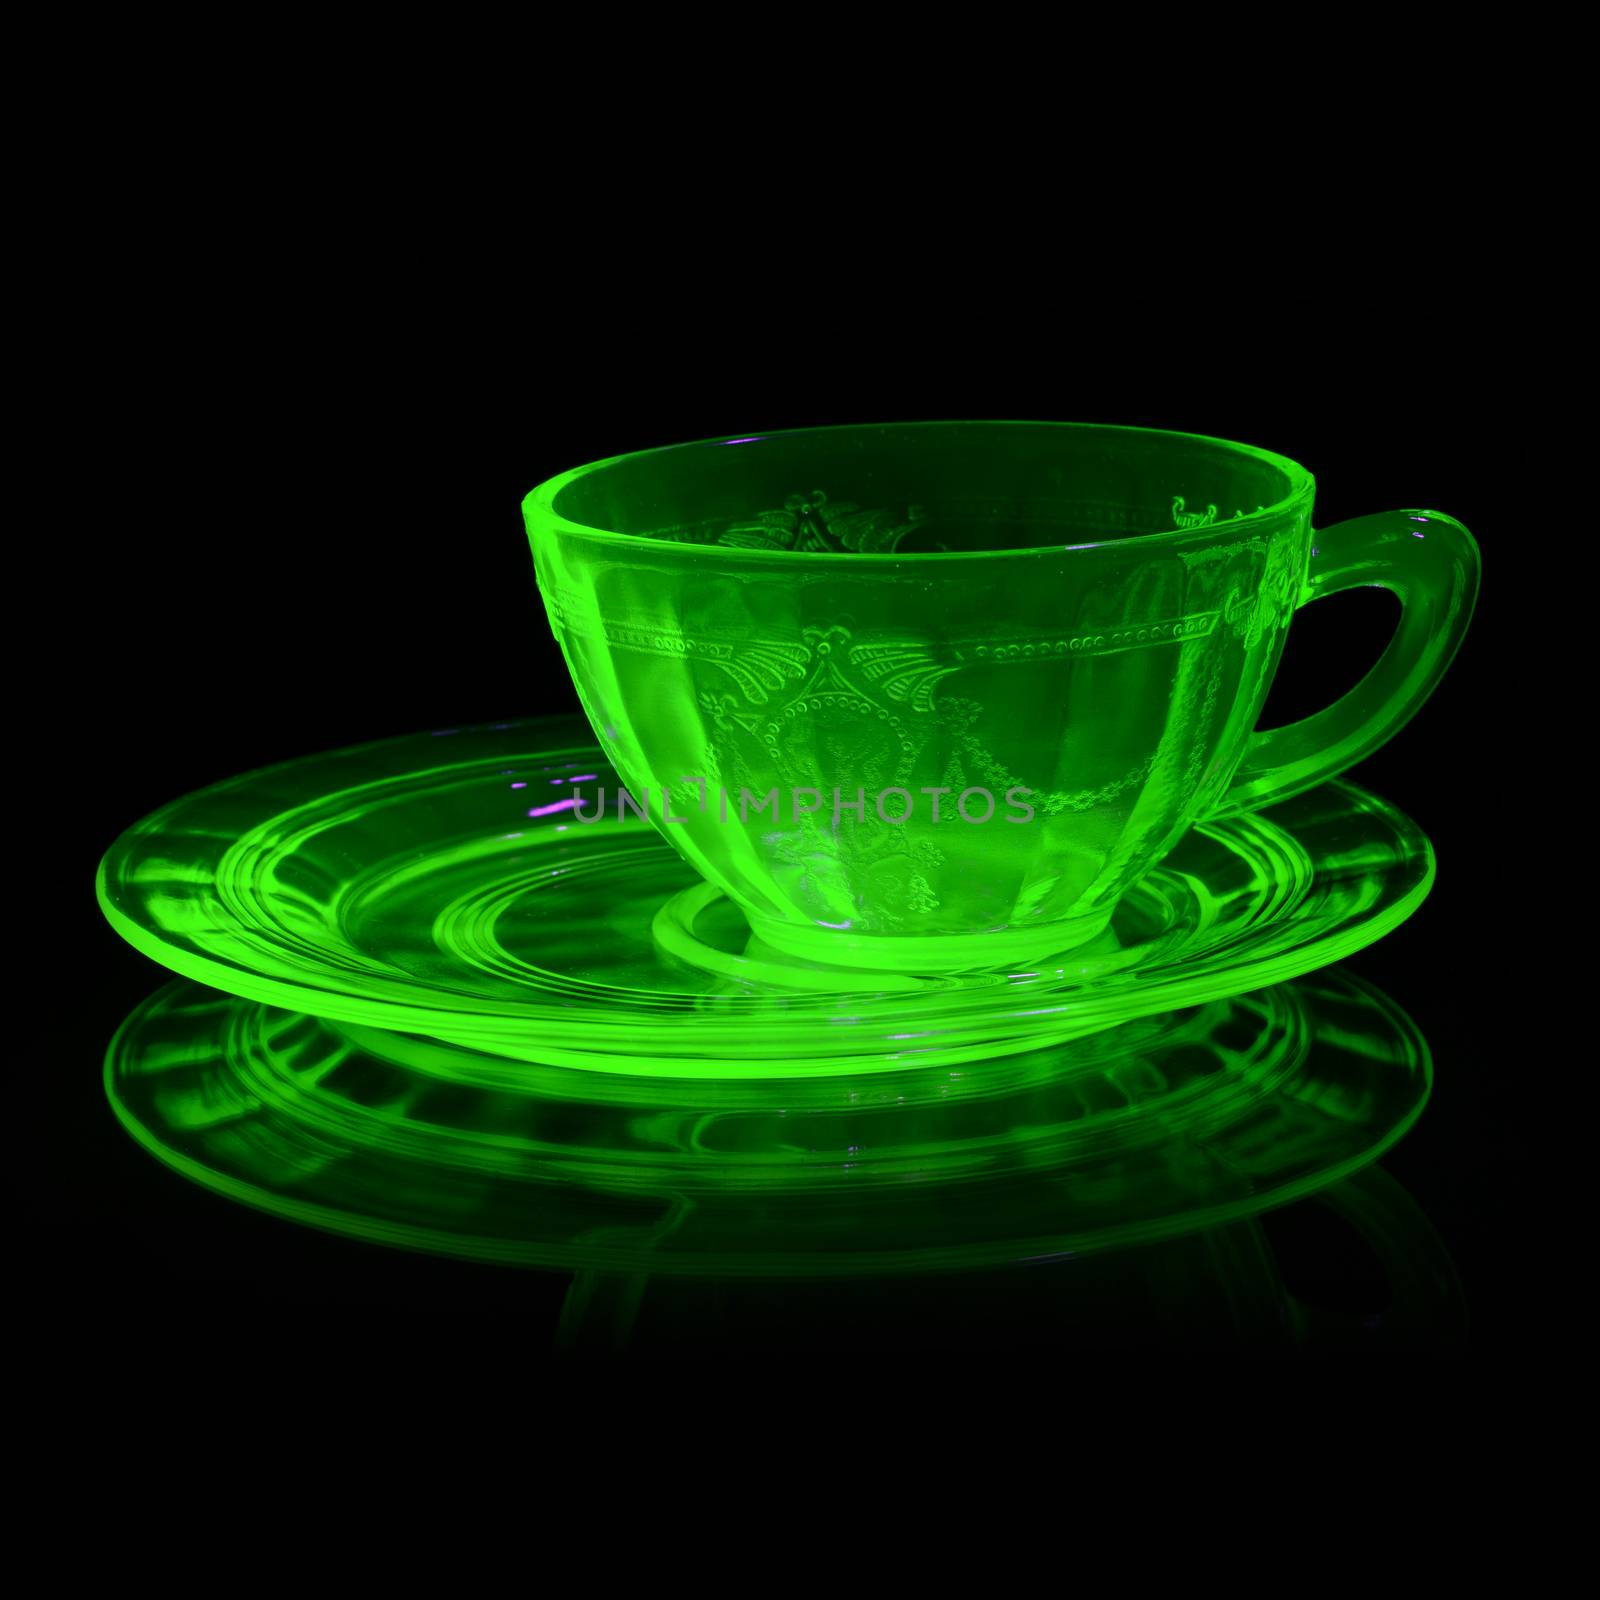 A glowing Uranium Glass Teacup and Saucer under Ultraviolet light to reveal its unique properties.